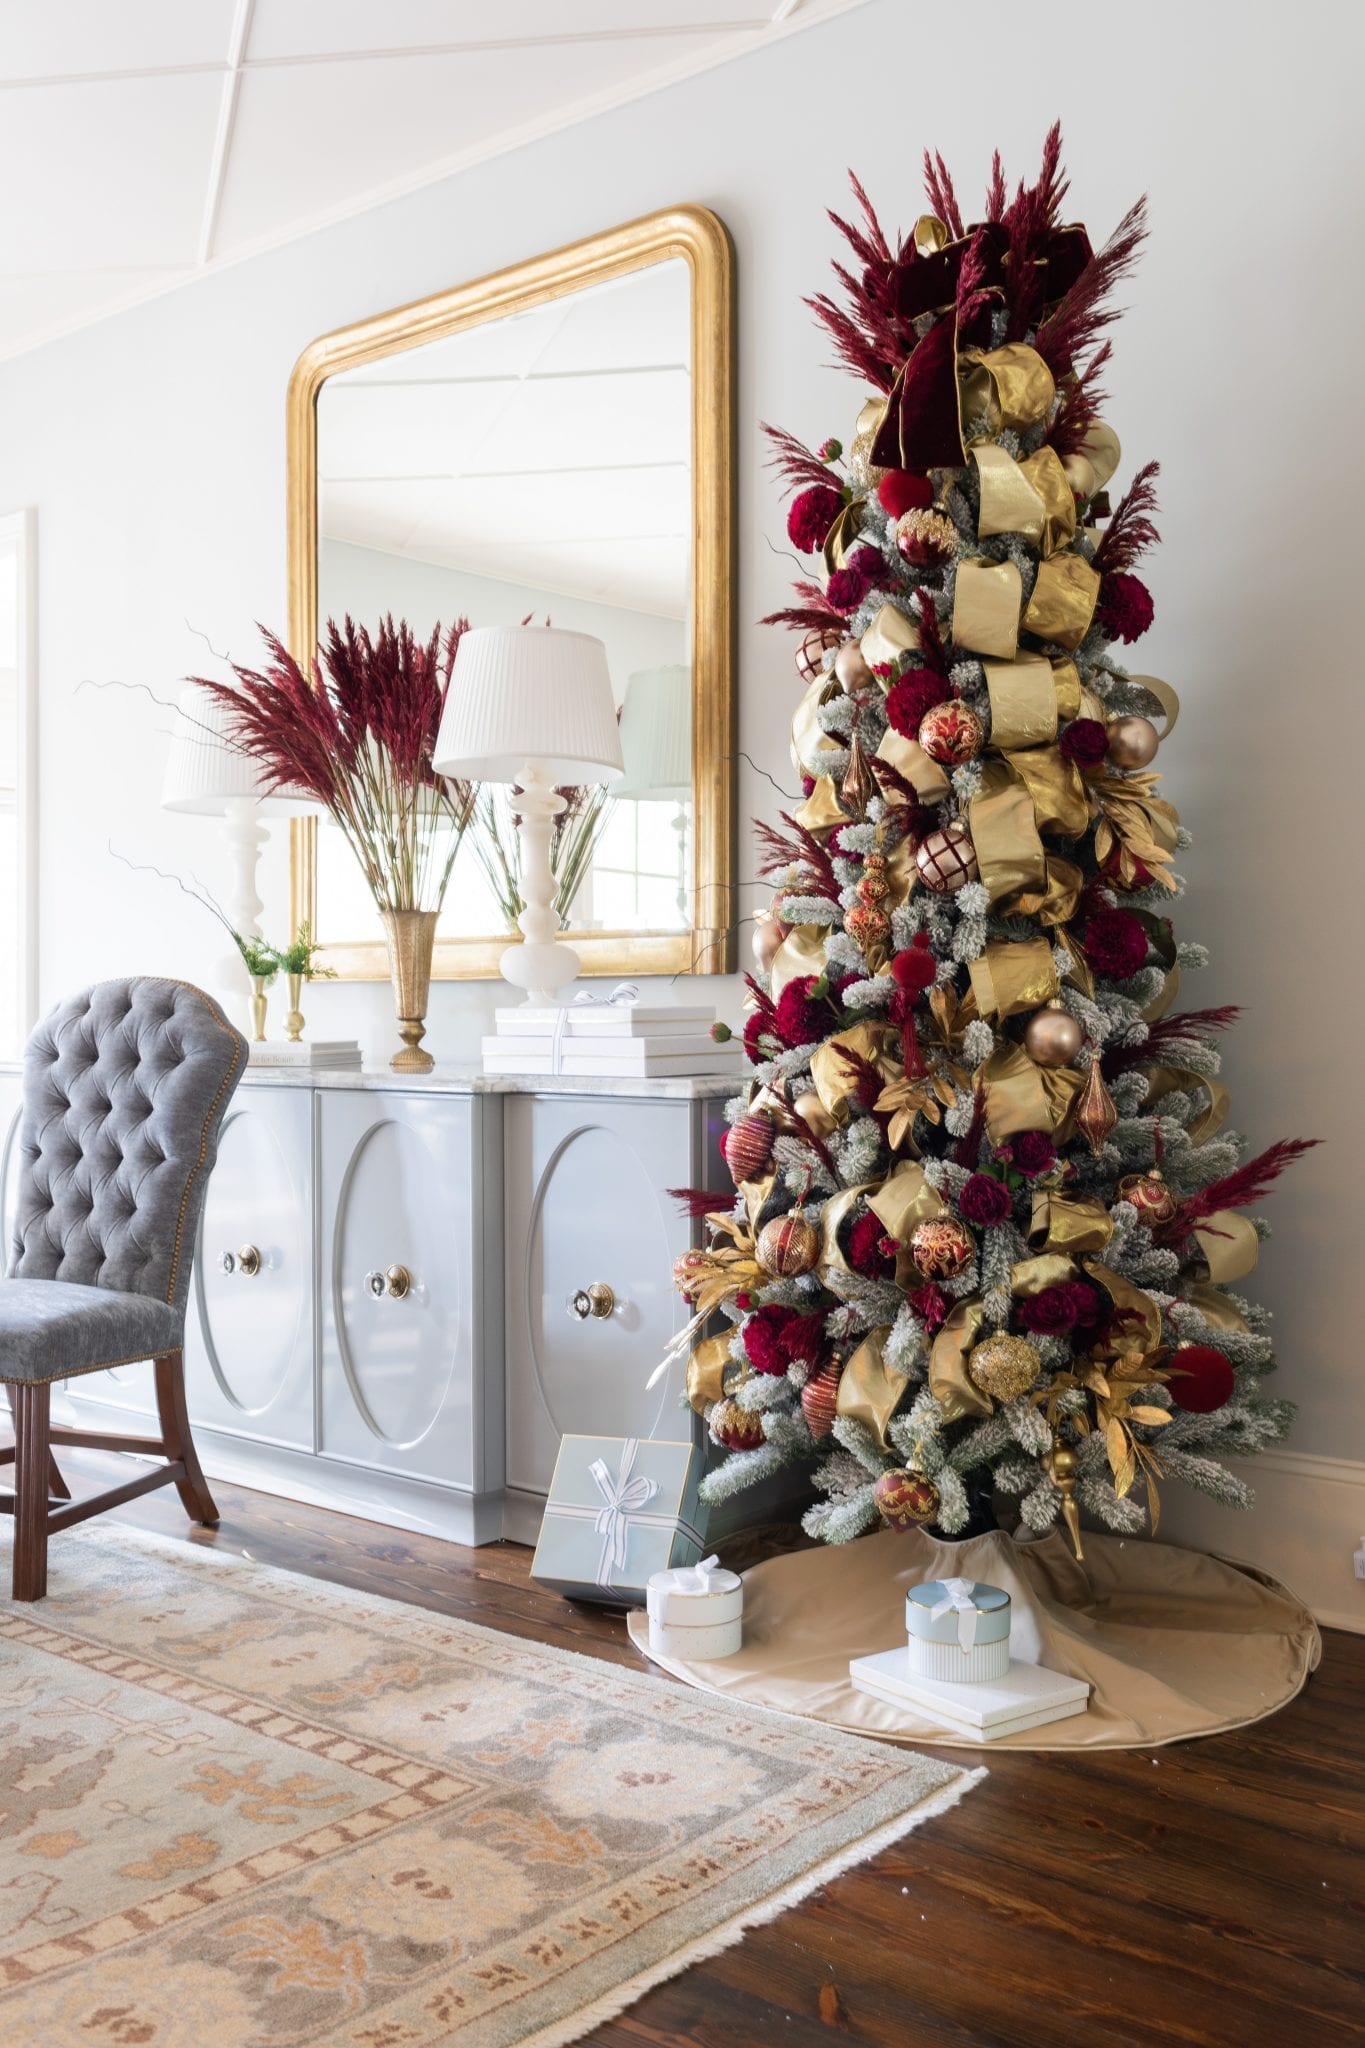 Decorating a white flocked Christmas tree and need some ideas? Flocked artificial Christmas trees give you so much room for new color ways & schemes! These flock Christmas tree ideas will inspire you to get a flocked tree this year and make your own mark on the holiday!